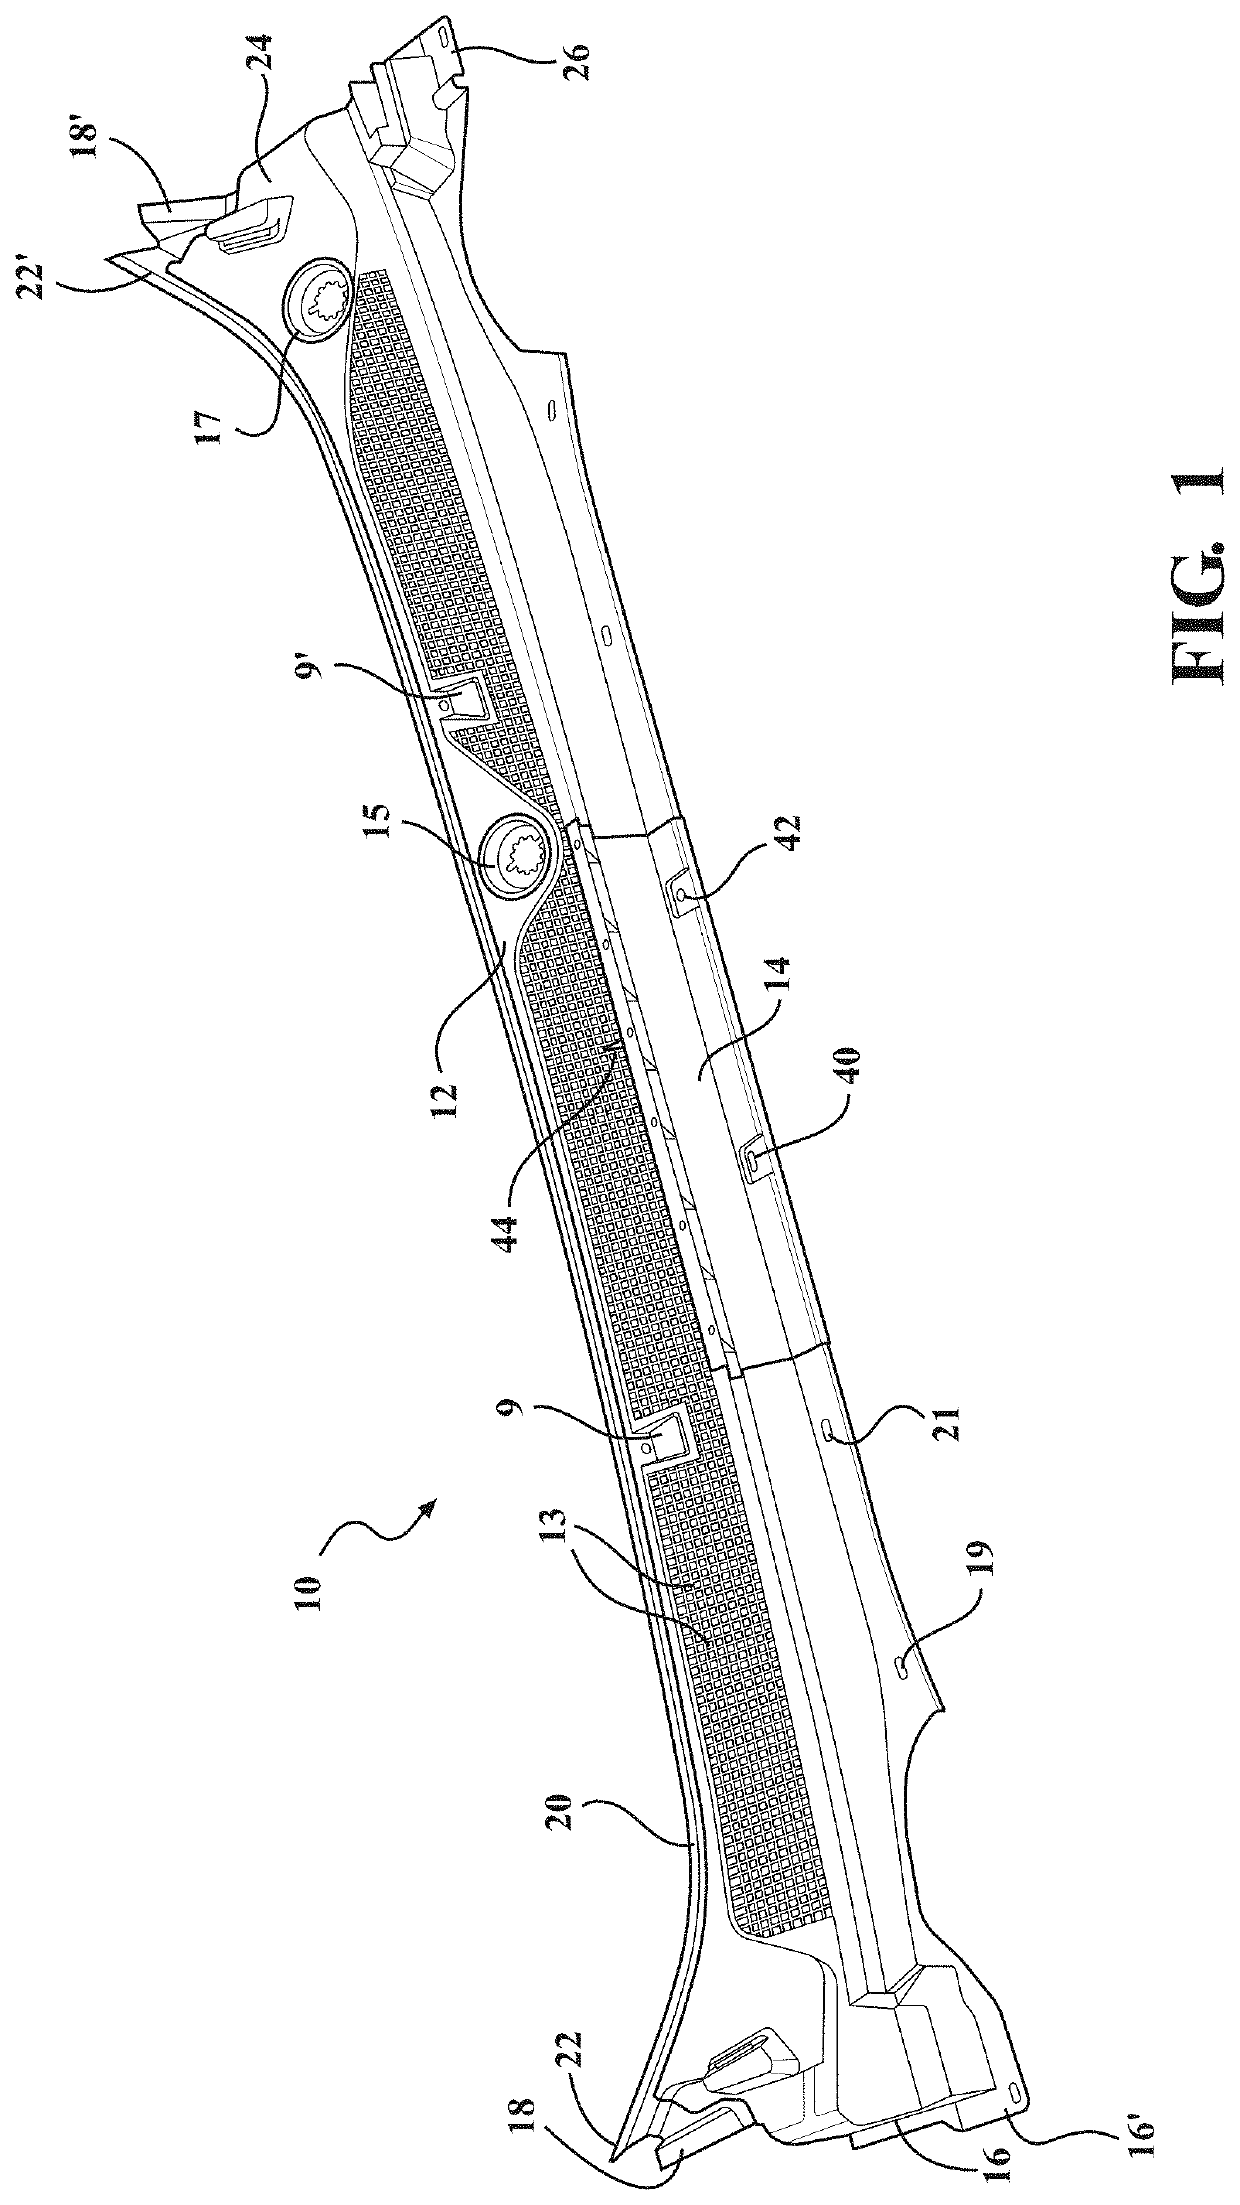 Method for producing a multi shot injection molded article incorporating a heat shield